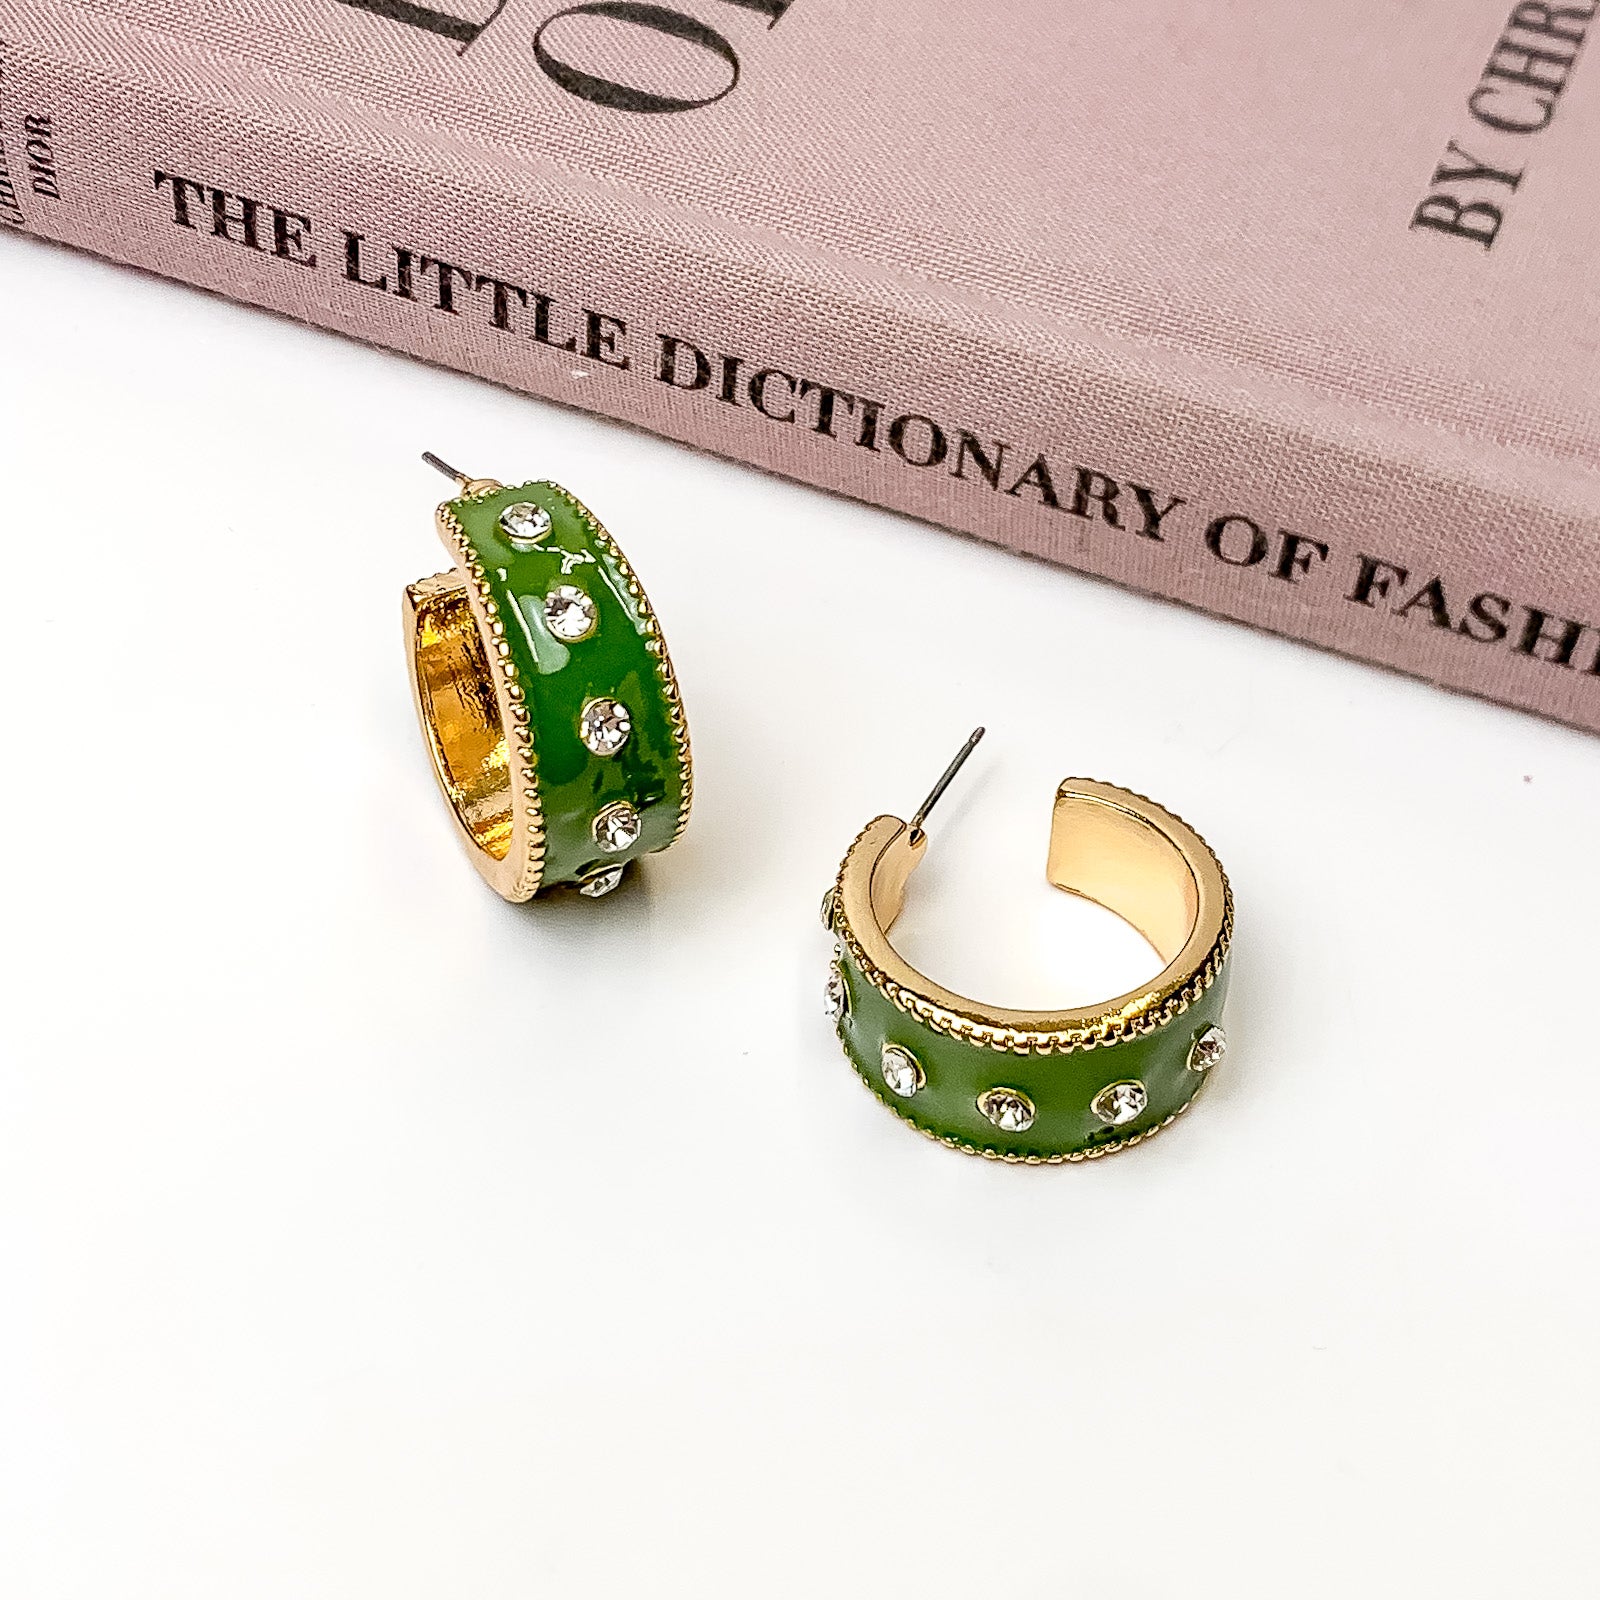 Surrounded By Starlight Small Hoop Earrings in Olive Green. Pictured on a white background with a book above the earrings.